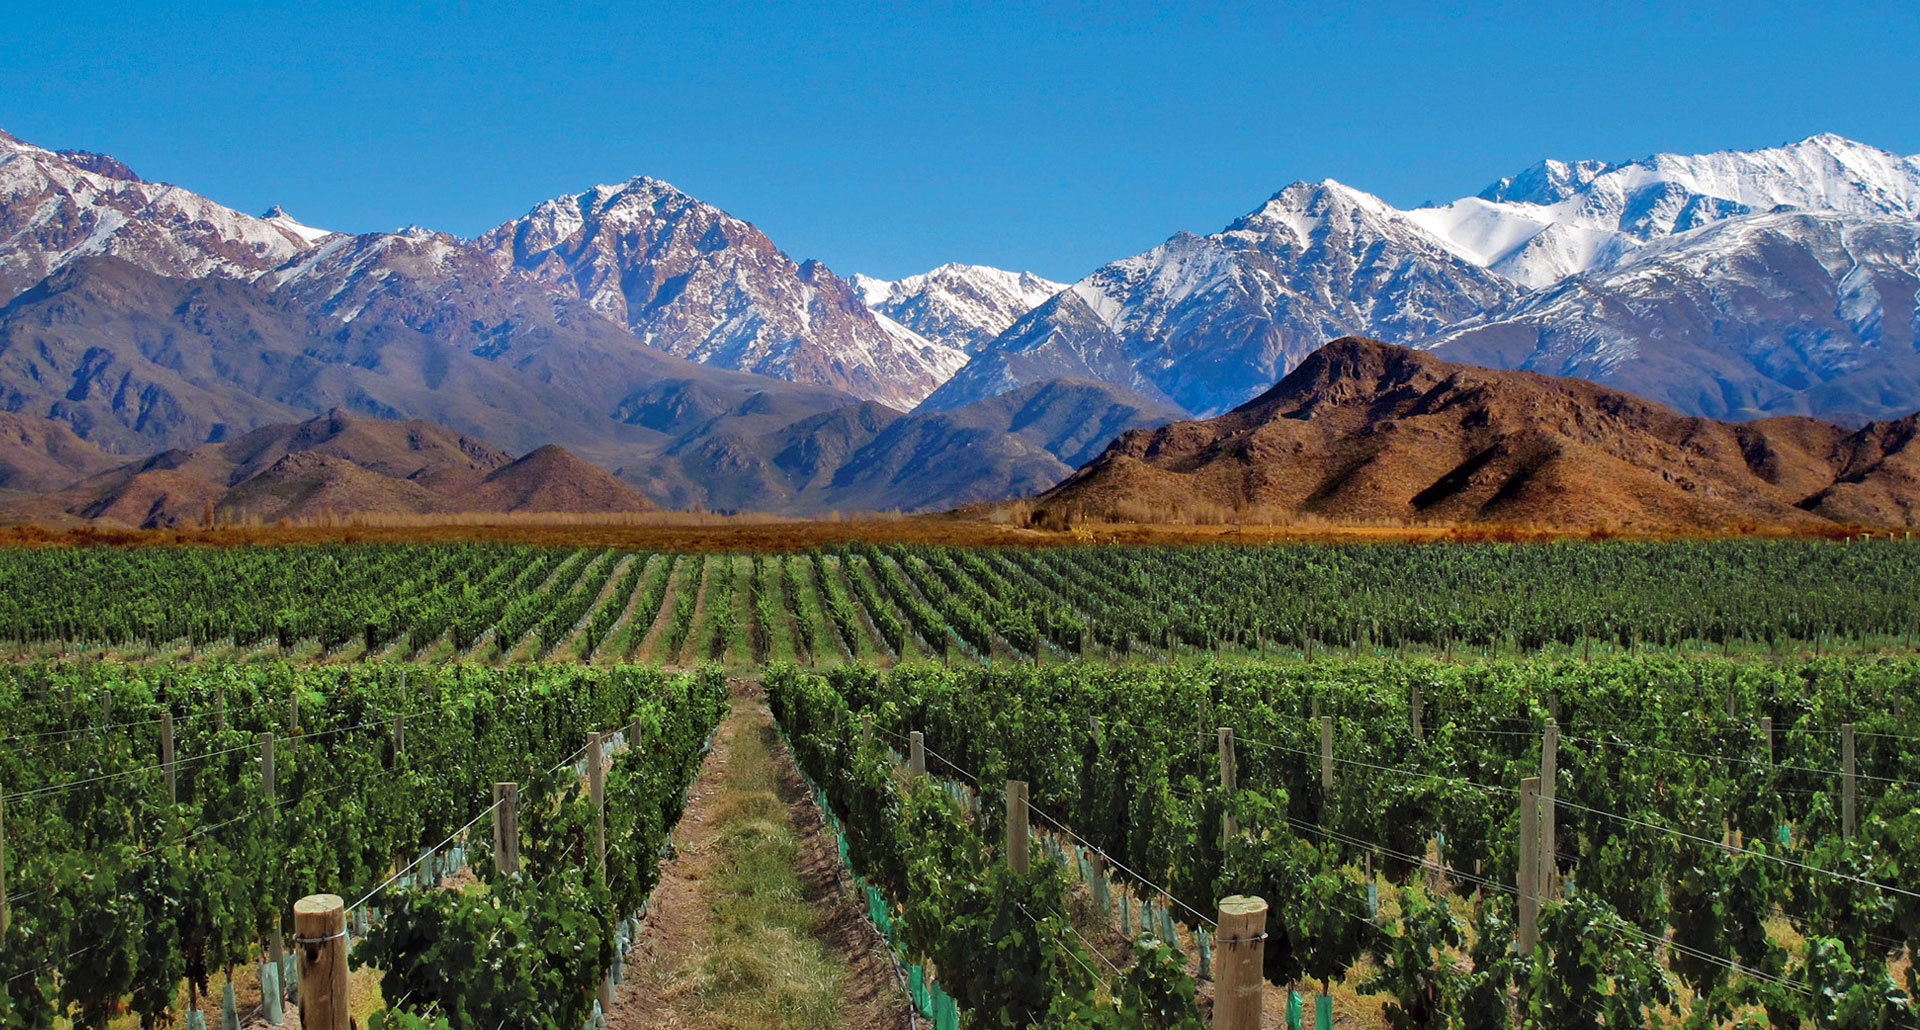 Malbec and Torrontes: Argentina’s Red and White Wine “Gems”